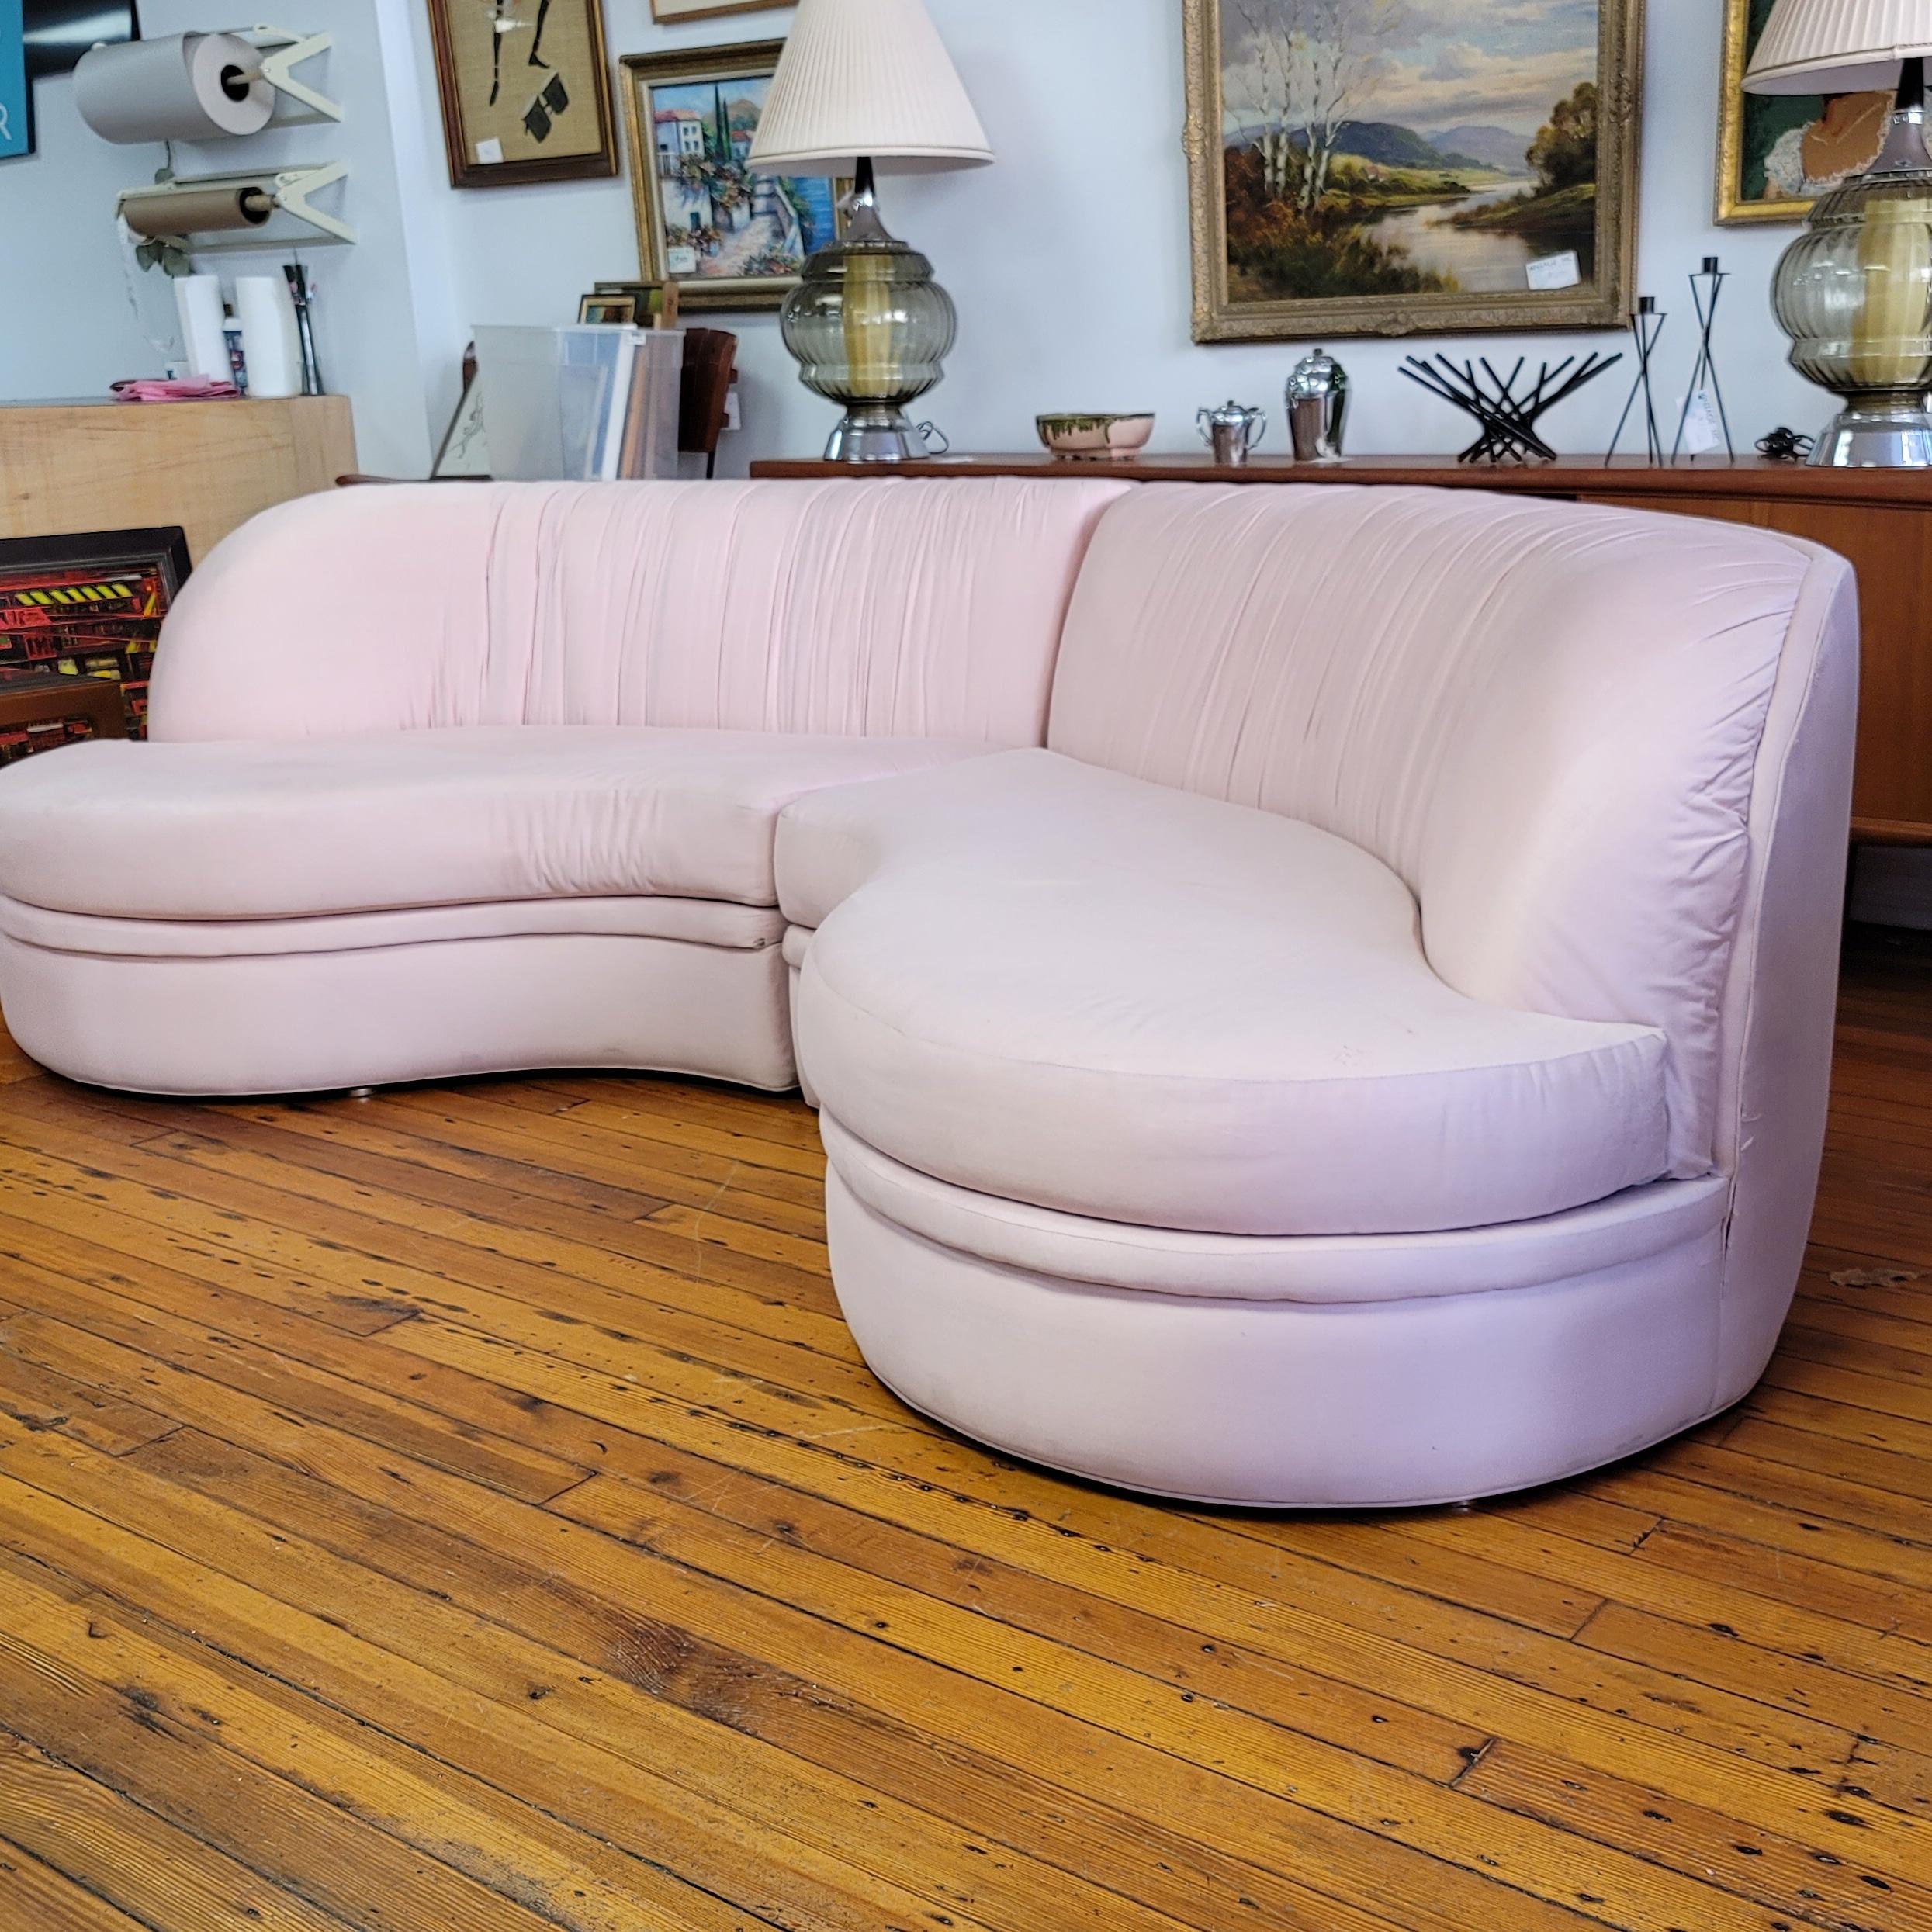 This stunning pink sofa designed by Milo Baughman is tagged with the Thayer Coggin label. The original uphoulstery is in average condition for its age with a few stains and small holes as shown in photos. The two-piece sectional has been